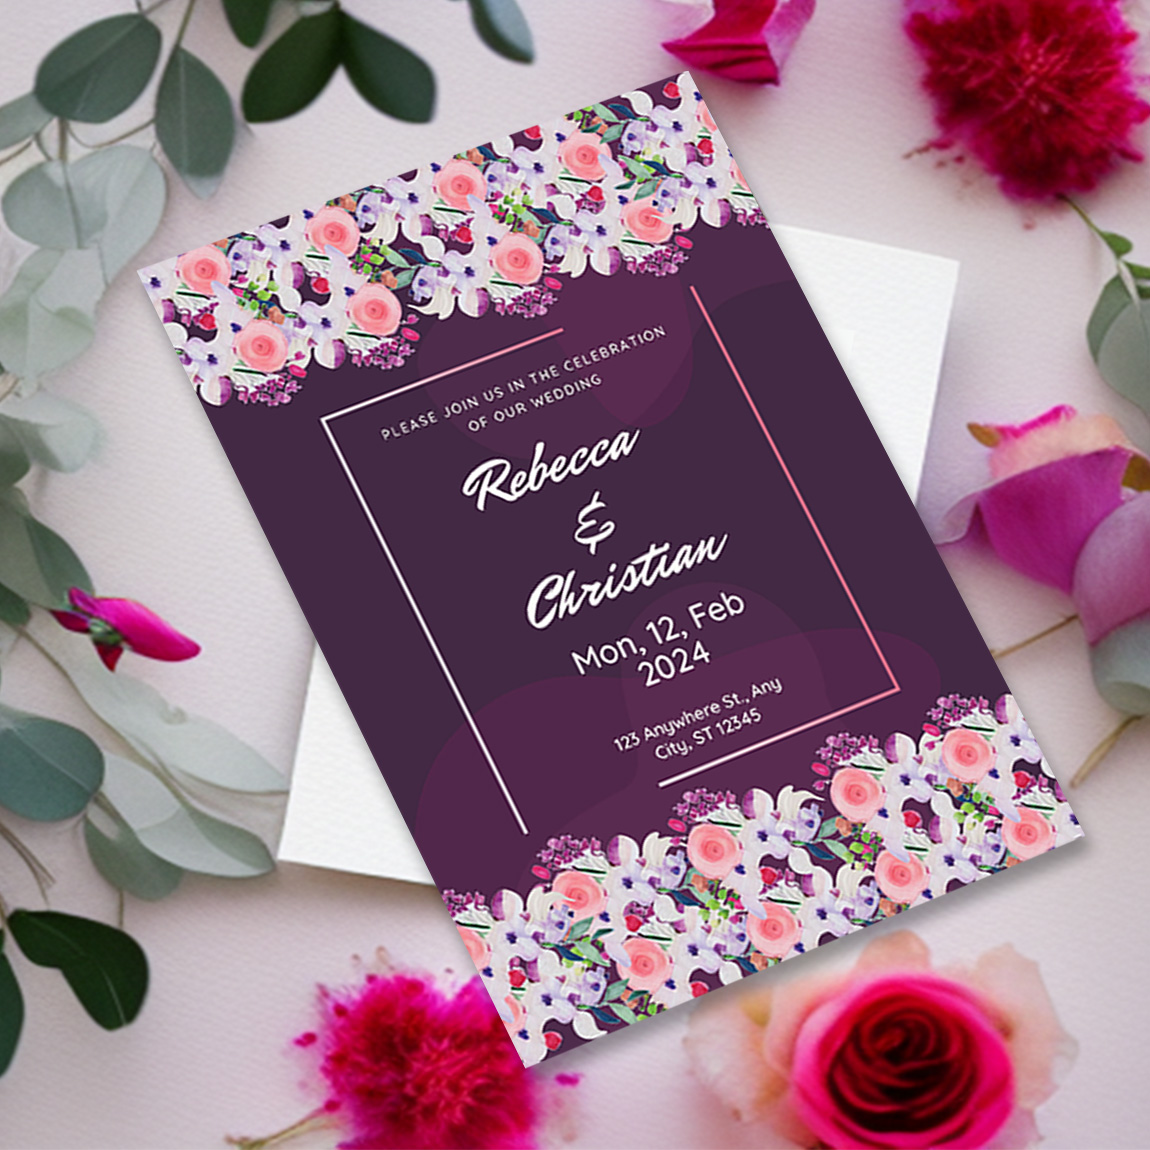 Image with colorful wedding invitation card with flowers.